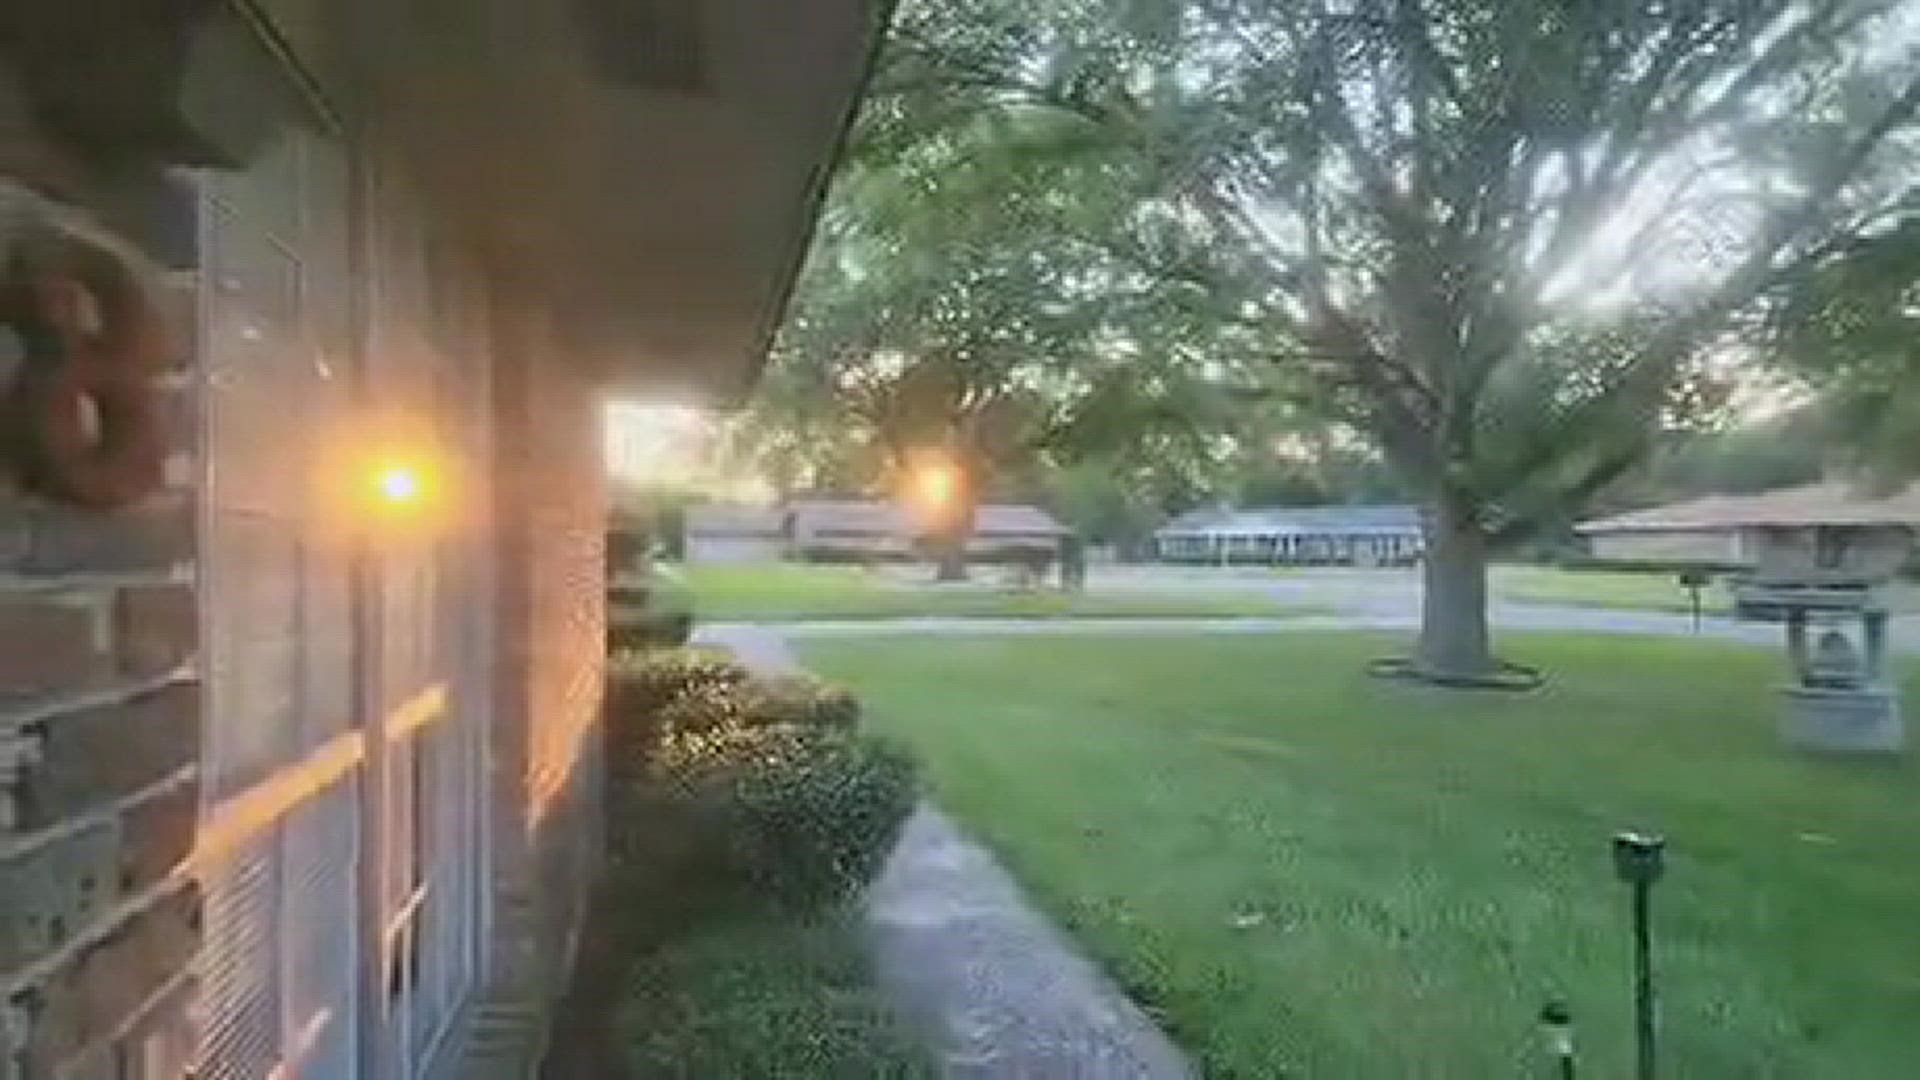 I took this beautiful sunset as I  slept out of my front door on Lakewood Lane in Pine Bluff this evening, take a close look at the reflection on my window. 
Samuel gaynor sr.
Credit: Samuel Gaynor Sr.